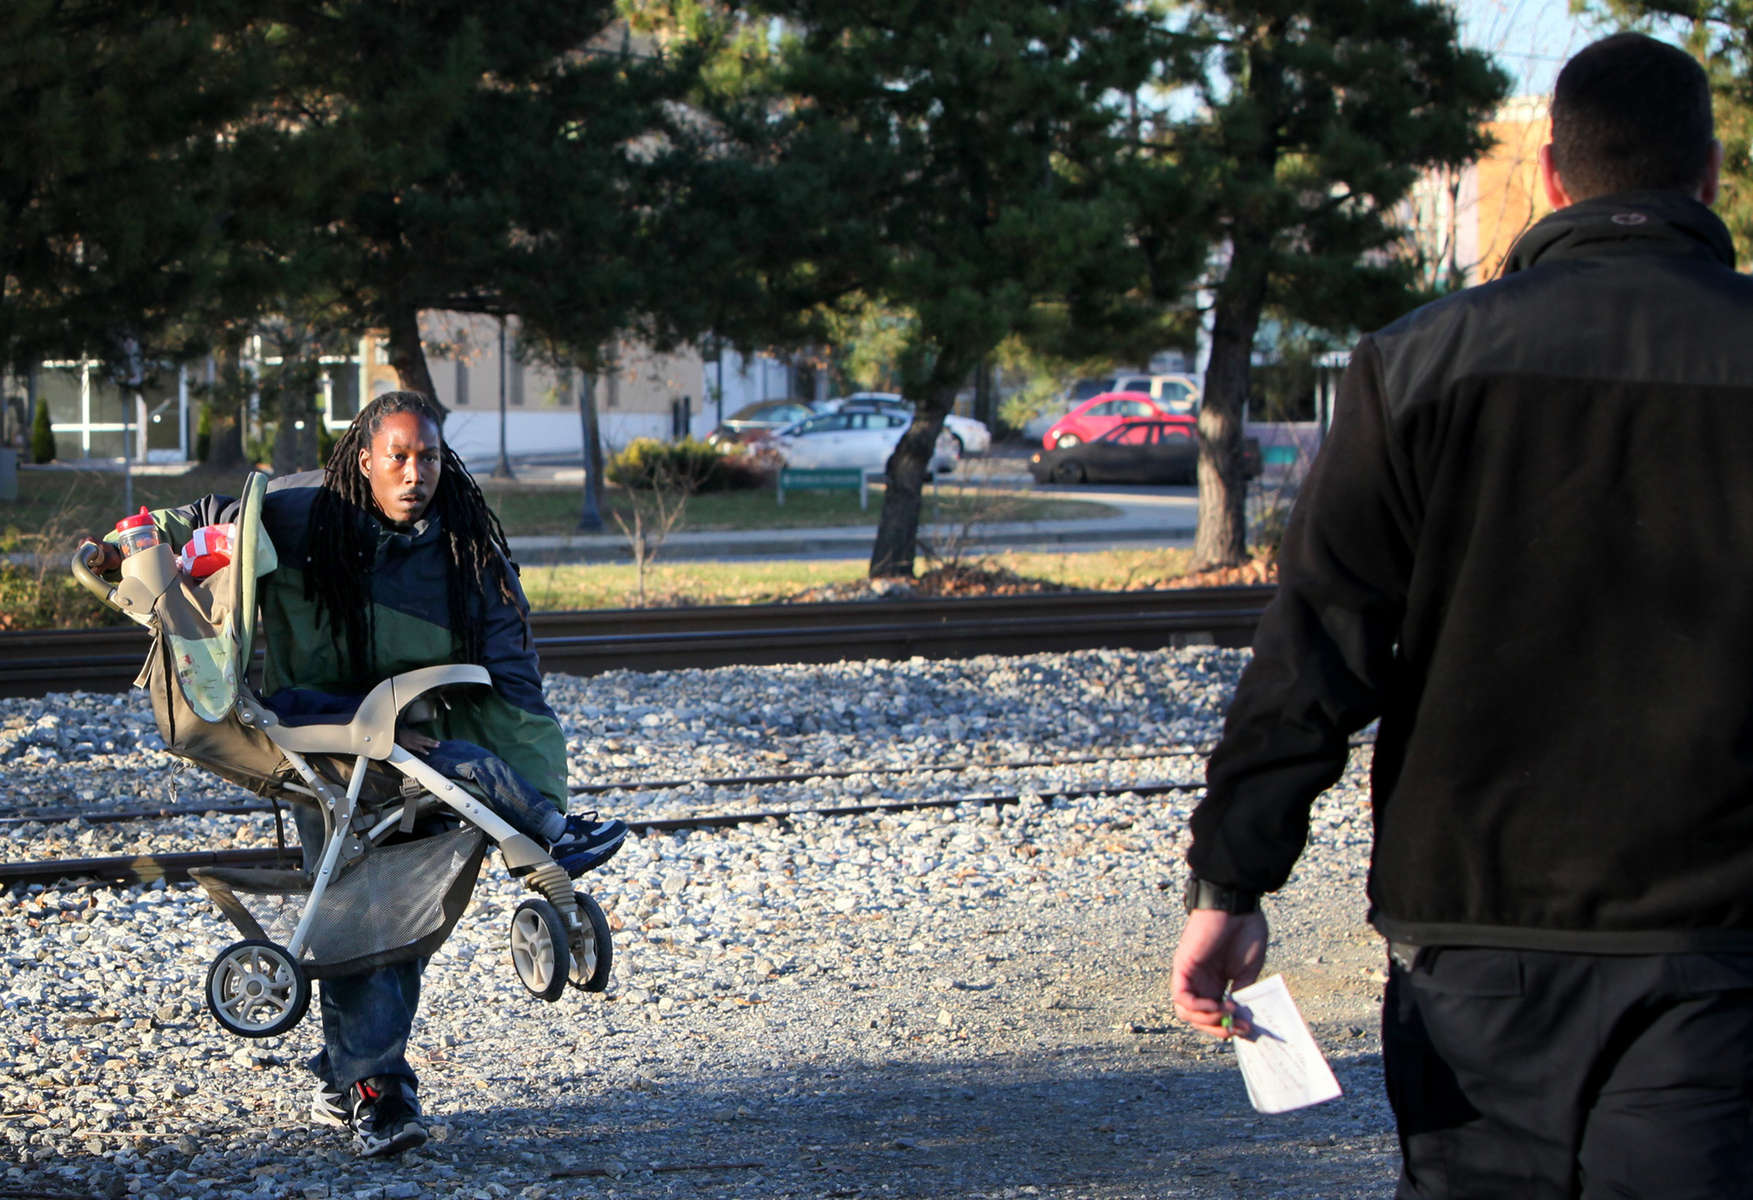 A man carrying a baby stroller across a set of train tracks in Hyattsville, Md., is stopped by CXS railroad police on Thursday, Nov. 29, 2012.  Even though the officer was only in the area performing surveillance of the tracks on an unrelated investigation he said he feels compelled to stop people who are trespassing when he sees it.  The man with the stroller, who did not want to be identified, was given a warning by the police.  Two fatalities have occurred in the area where the man crossed the tracks.  There are several no trespassing signs posted along either side of the tracks.Photo By David Carson, dcarson@post-dispatch.com